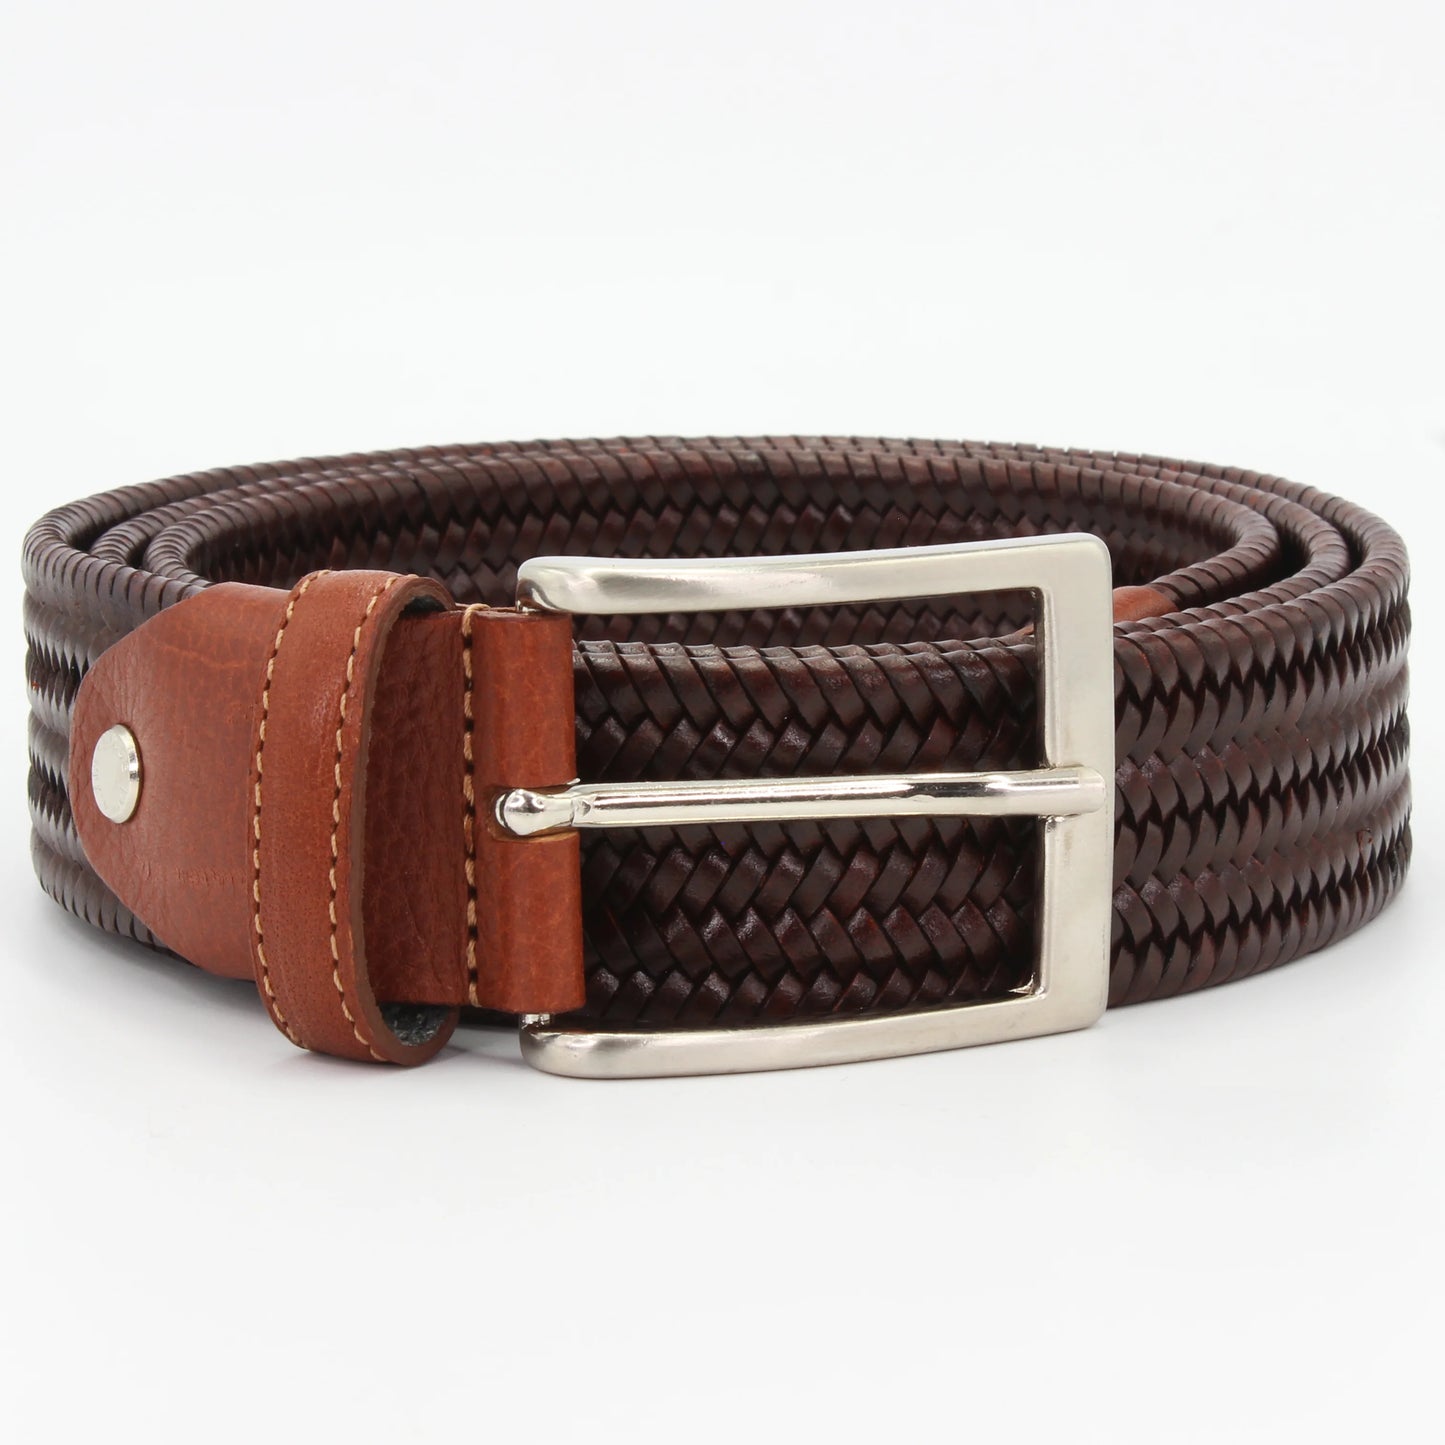 Shop our Italian-made Cuoieria Fiorentina woven leather belt in marrone (C10DGEL00G000) or browse our range of Italian belts for men & women in-store at Aliverti Cape Town, or shop online.   We deliver in South Africa & offer multiple payment plans as well as accept multiple safe & secure payment methods.